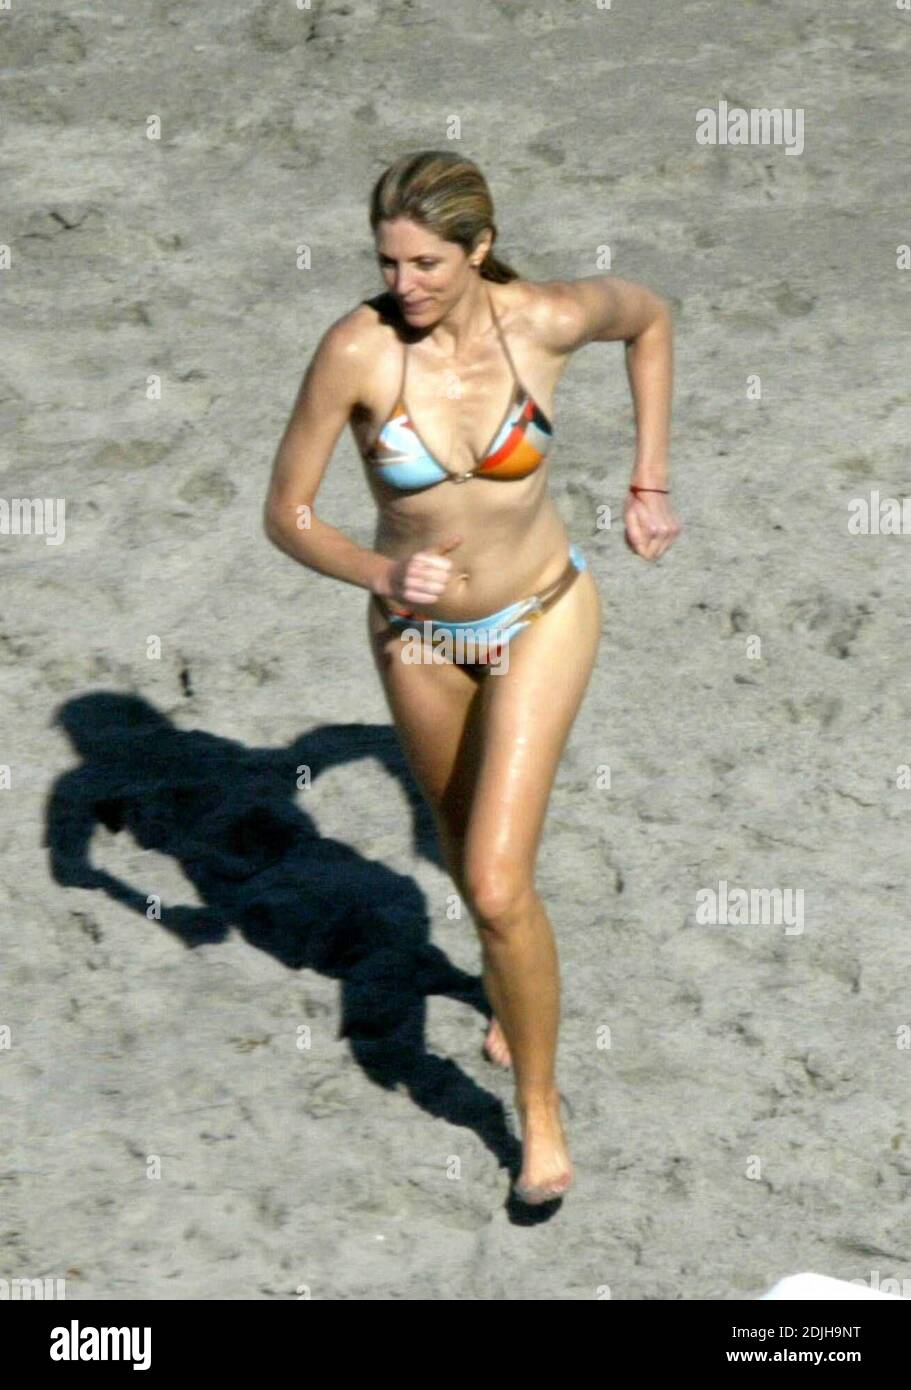 Exclusive!! Marla Maples still looks great at 42. The model/actress and former wife of Donald Trump lunched on Miami Beach while chatting with friends before taking a refreshing dip in the ocean, 4/14/06. Stock Photo